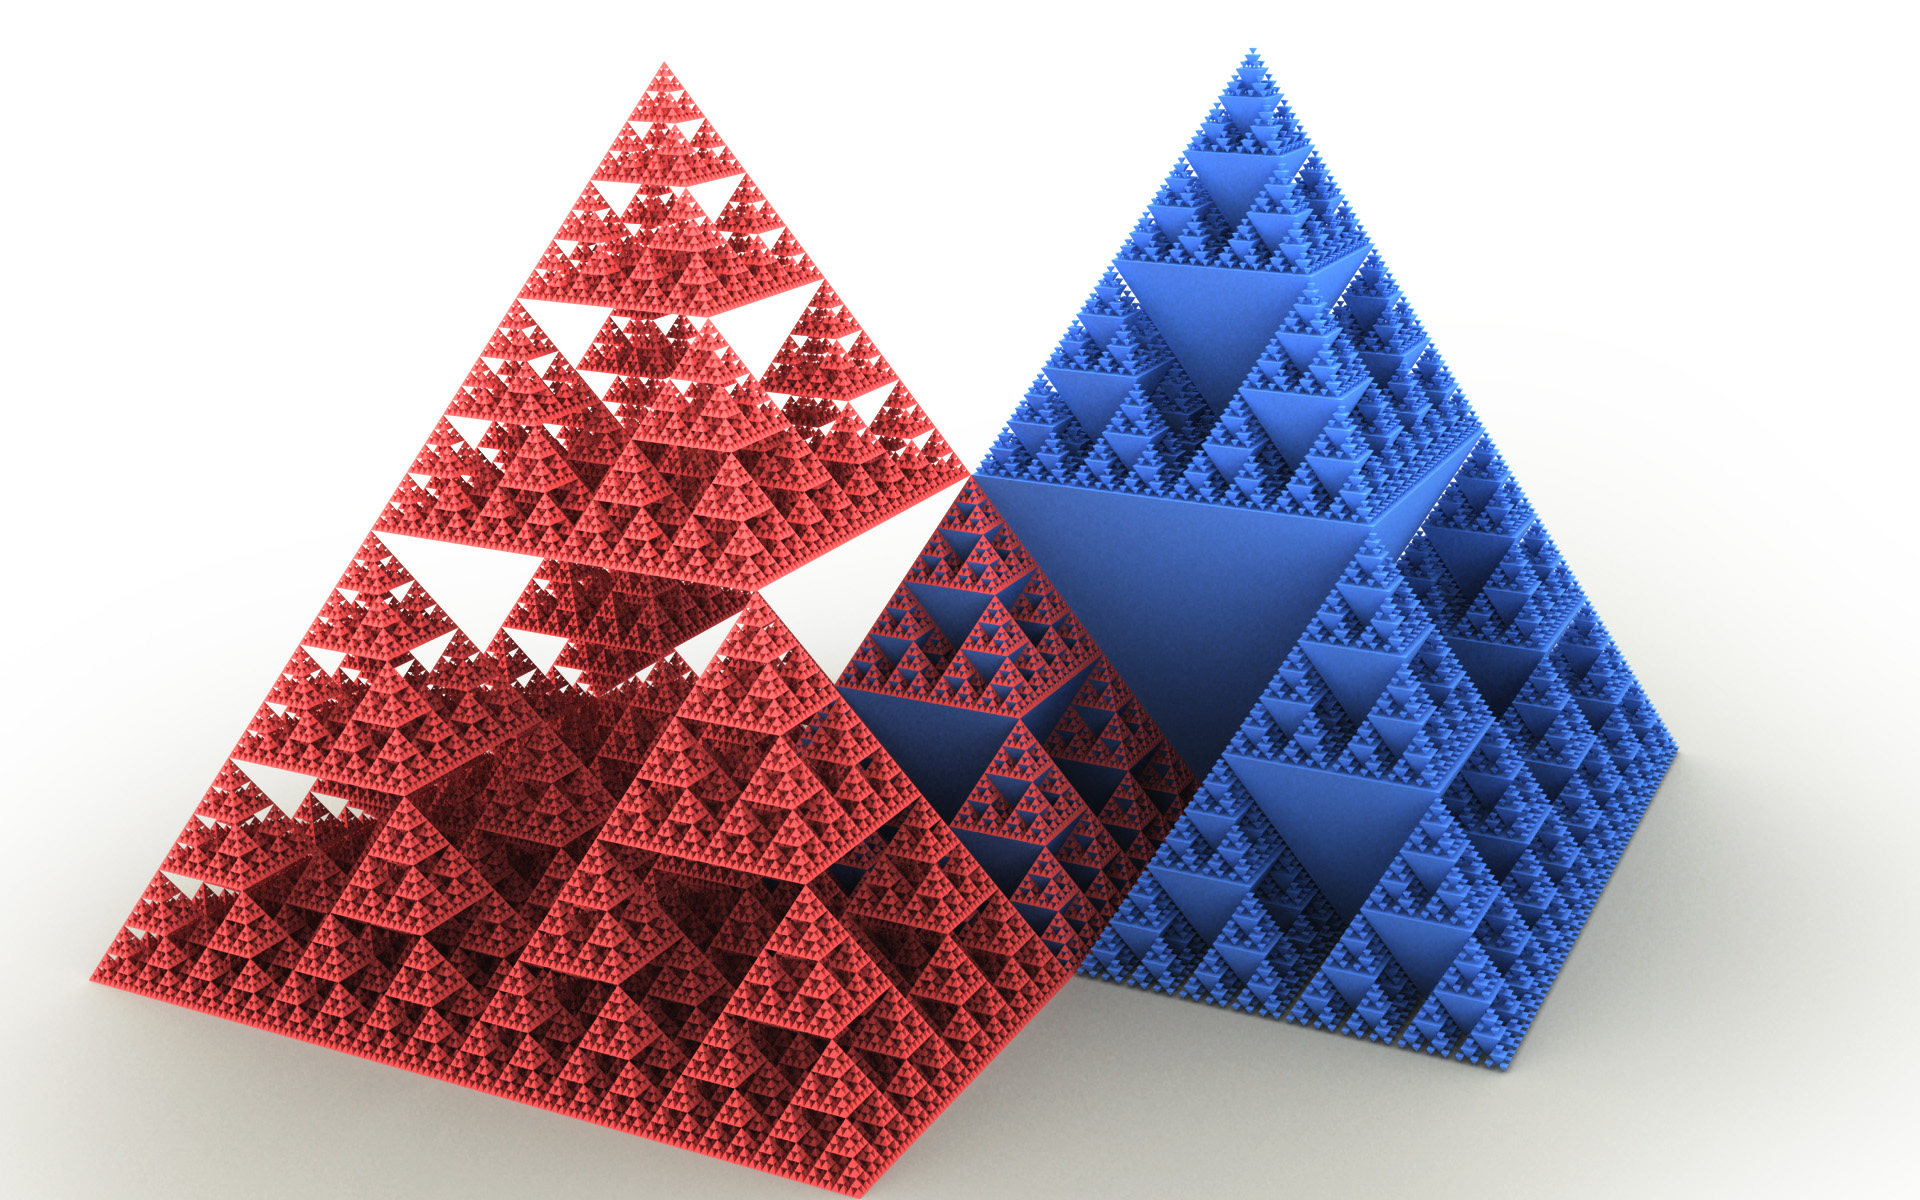 pyramid, Red, Blue, Colourfull Wallpaper